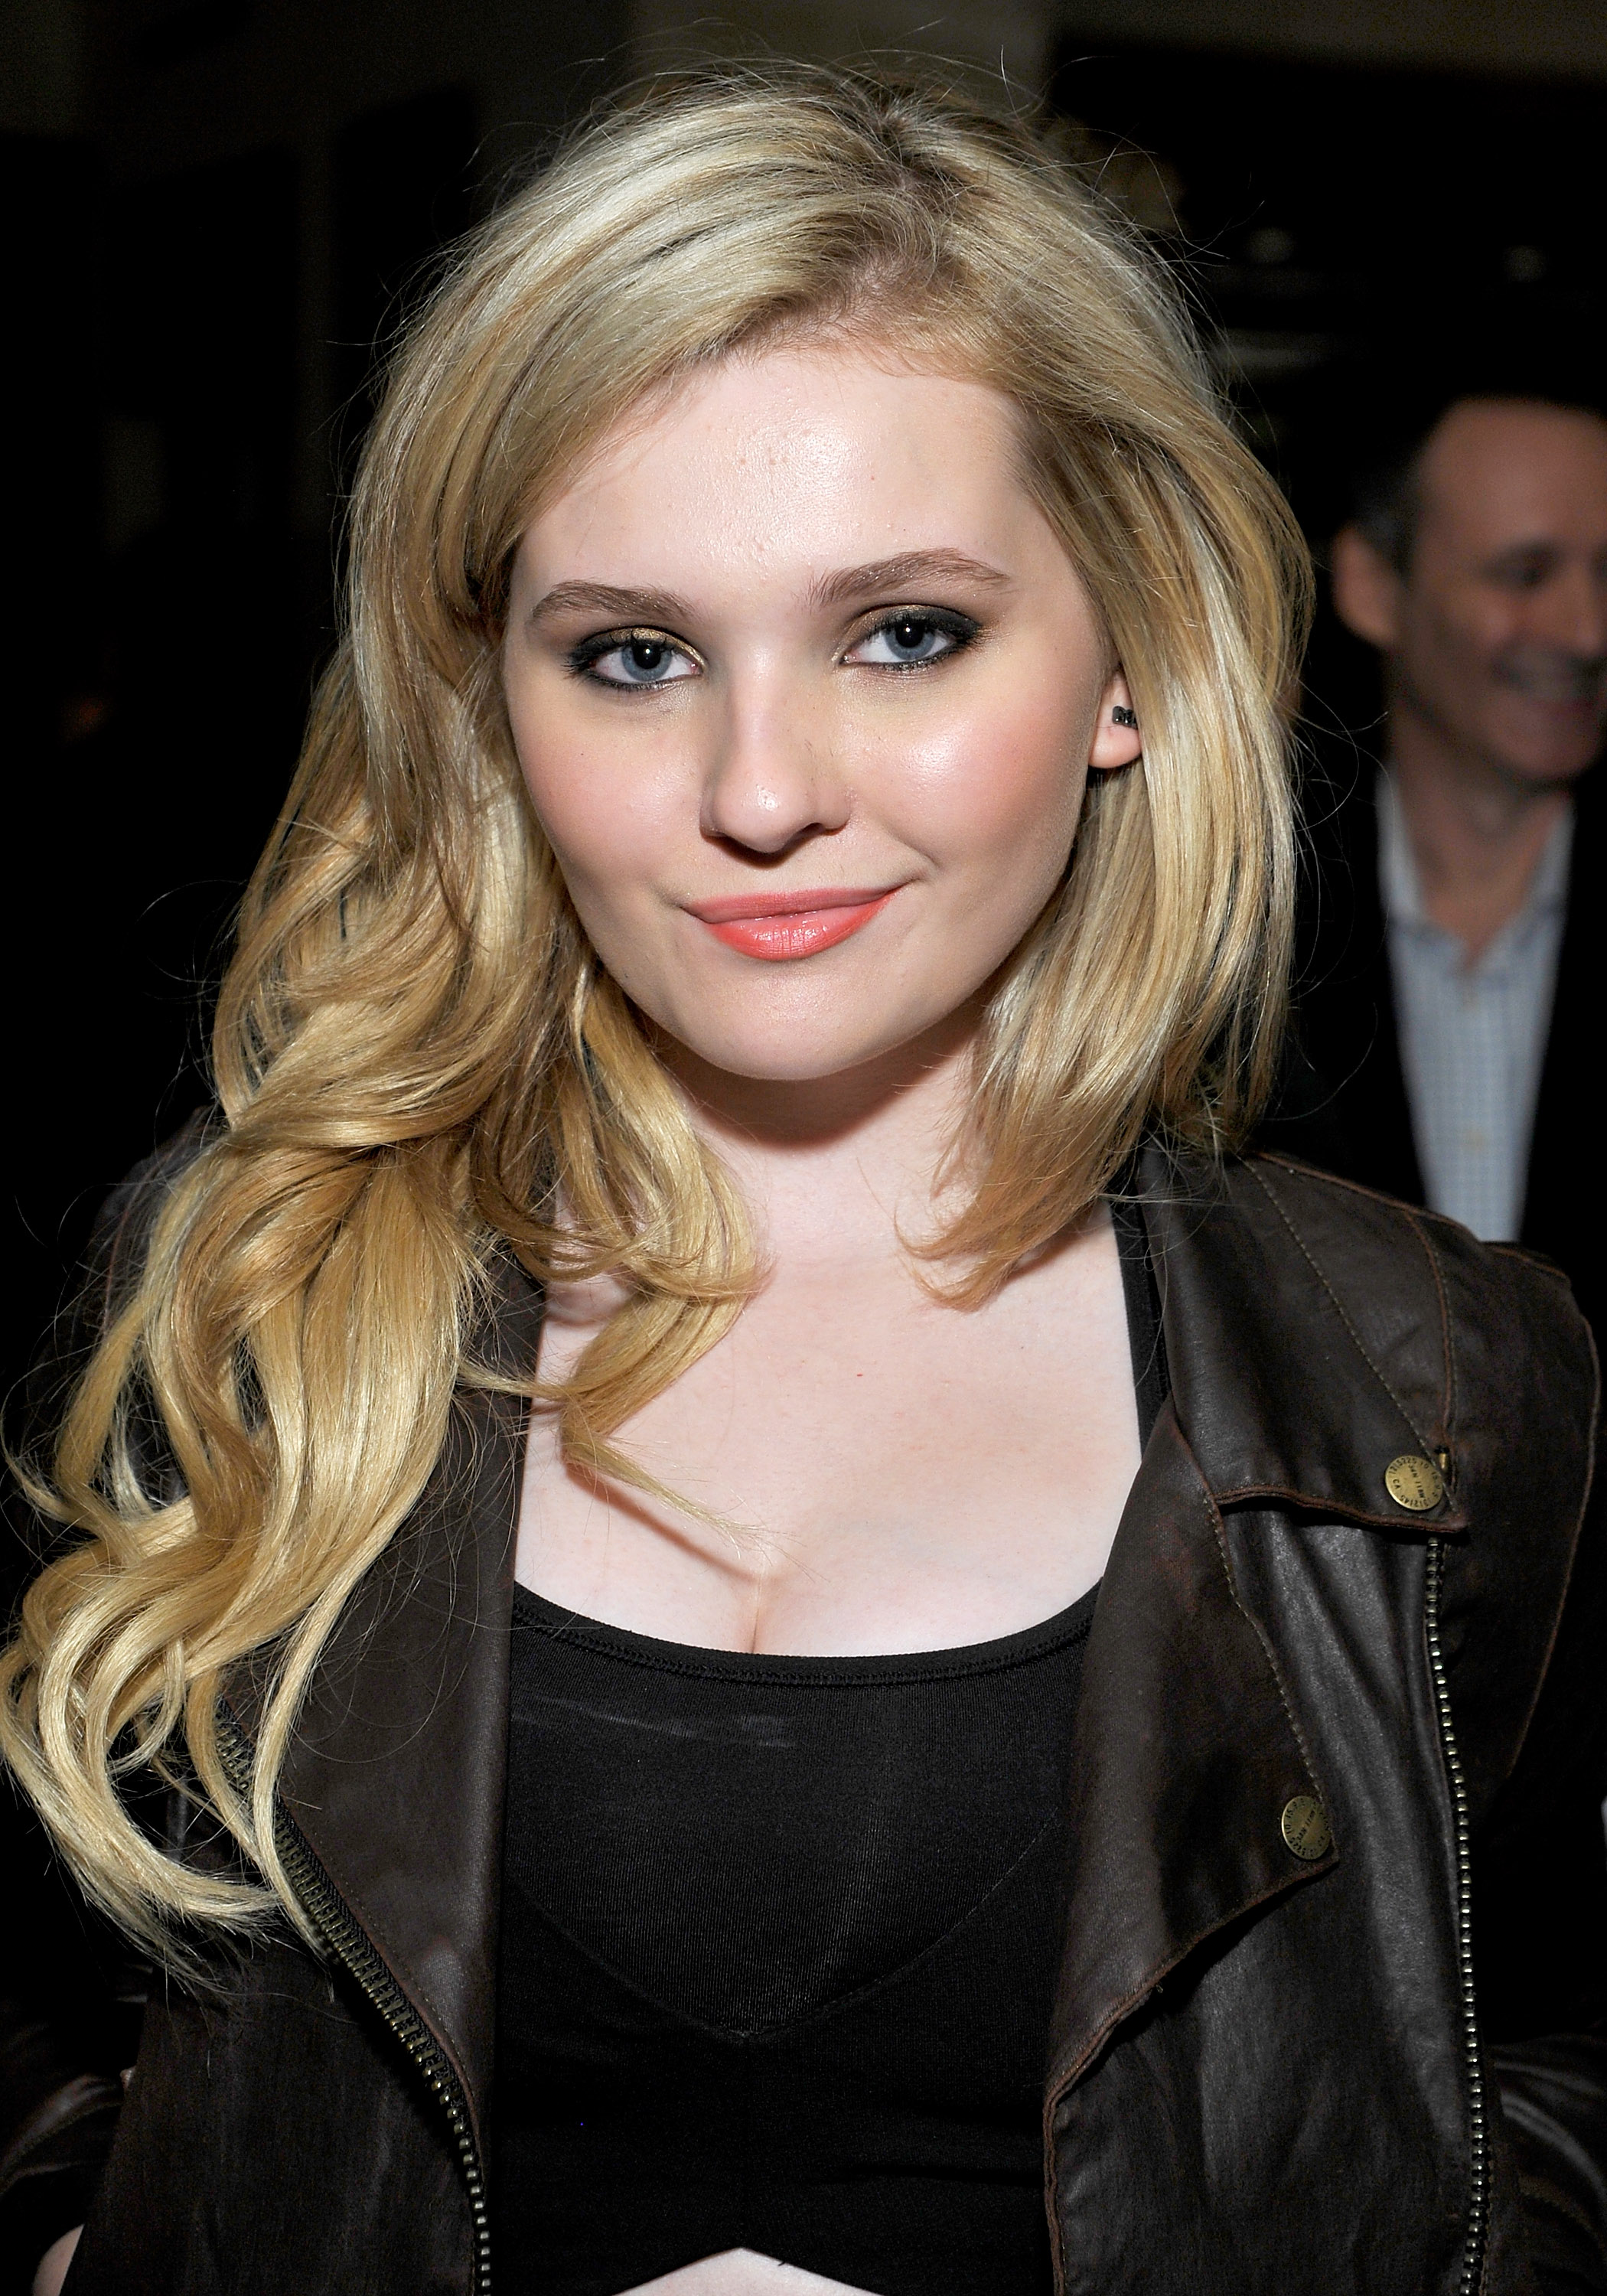 Abigail Breslins Topless Photos Are Kind Of Well Sad